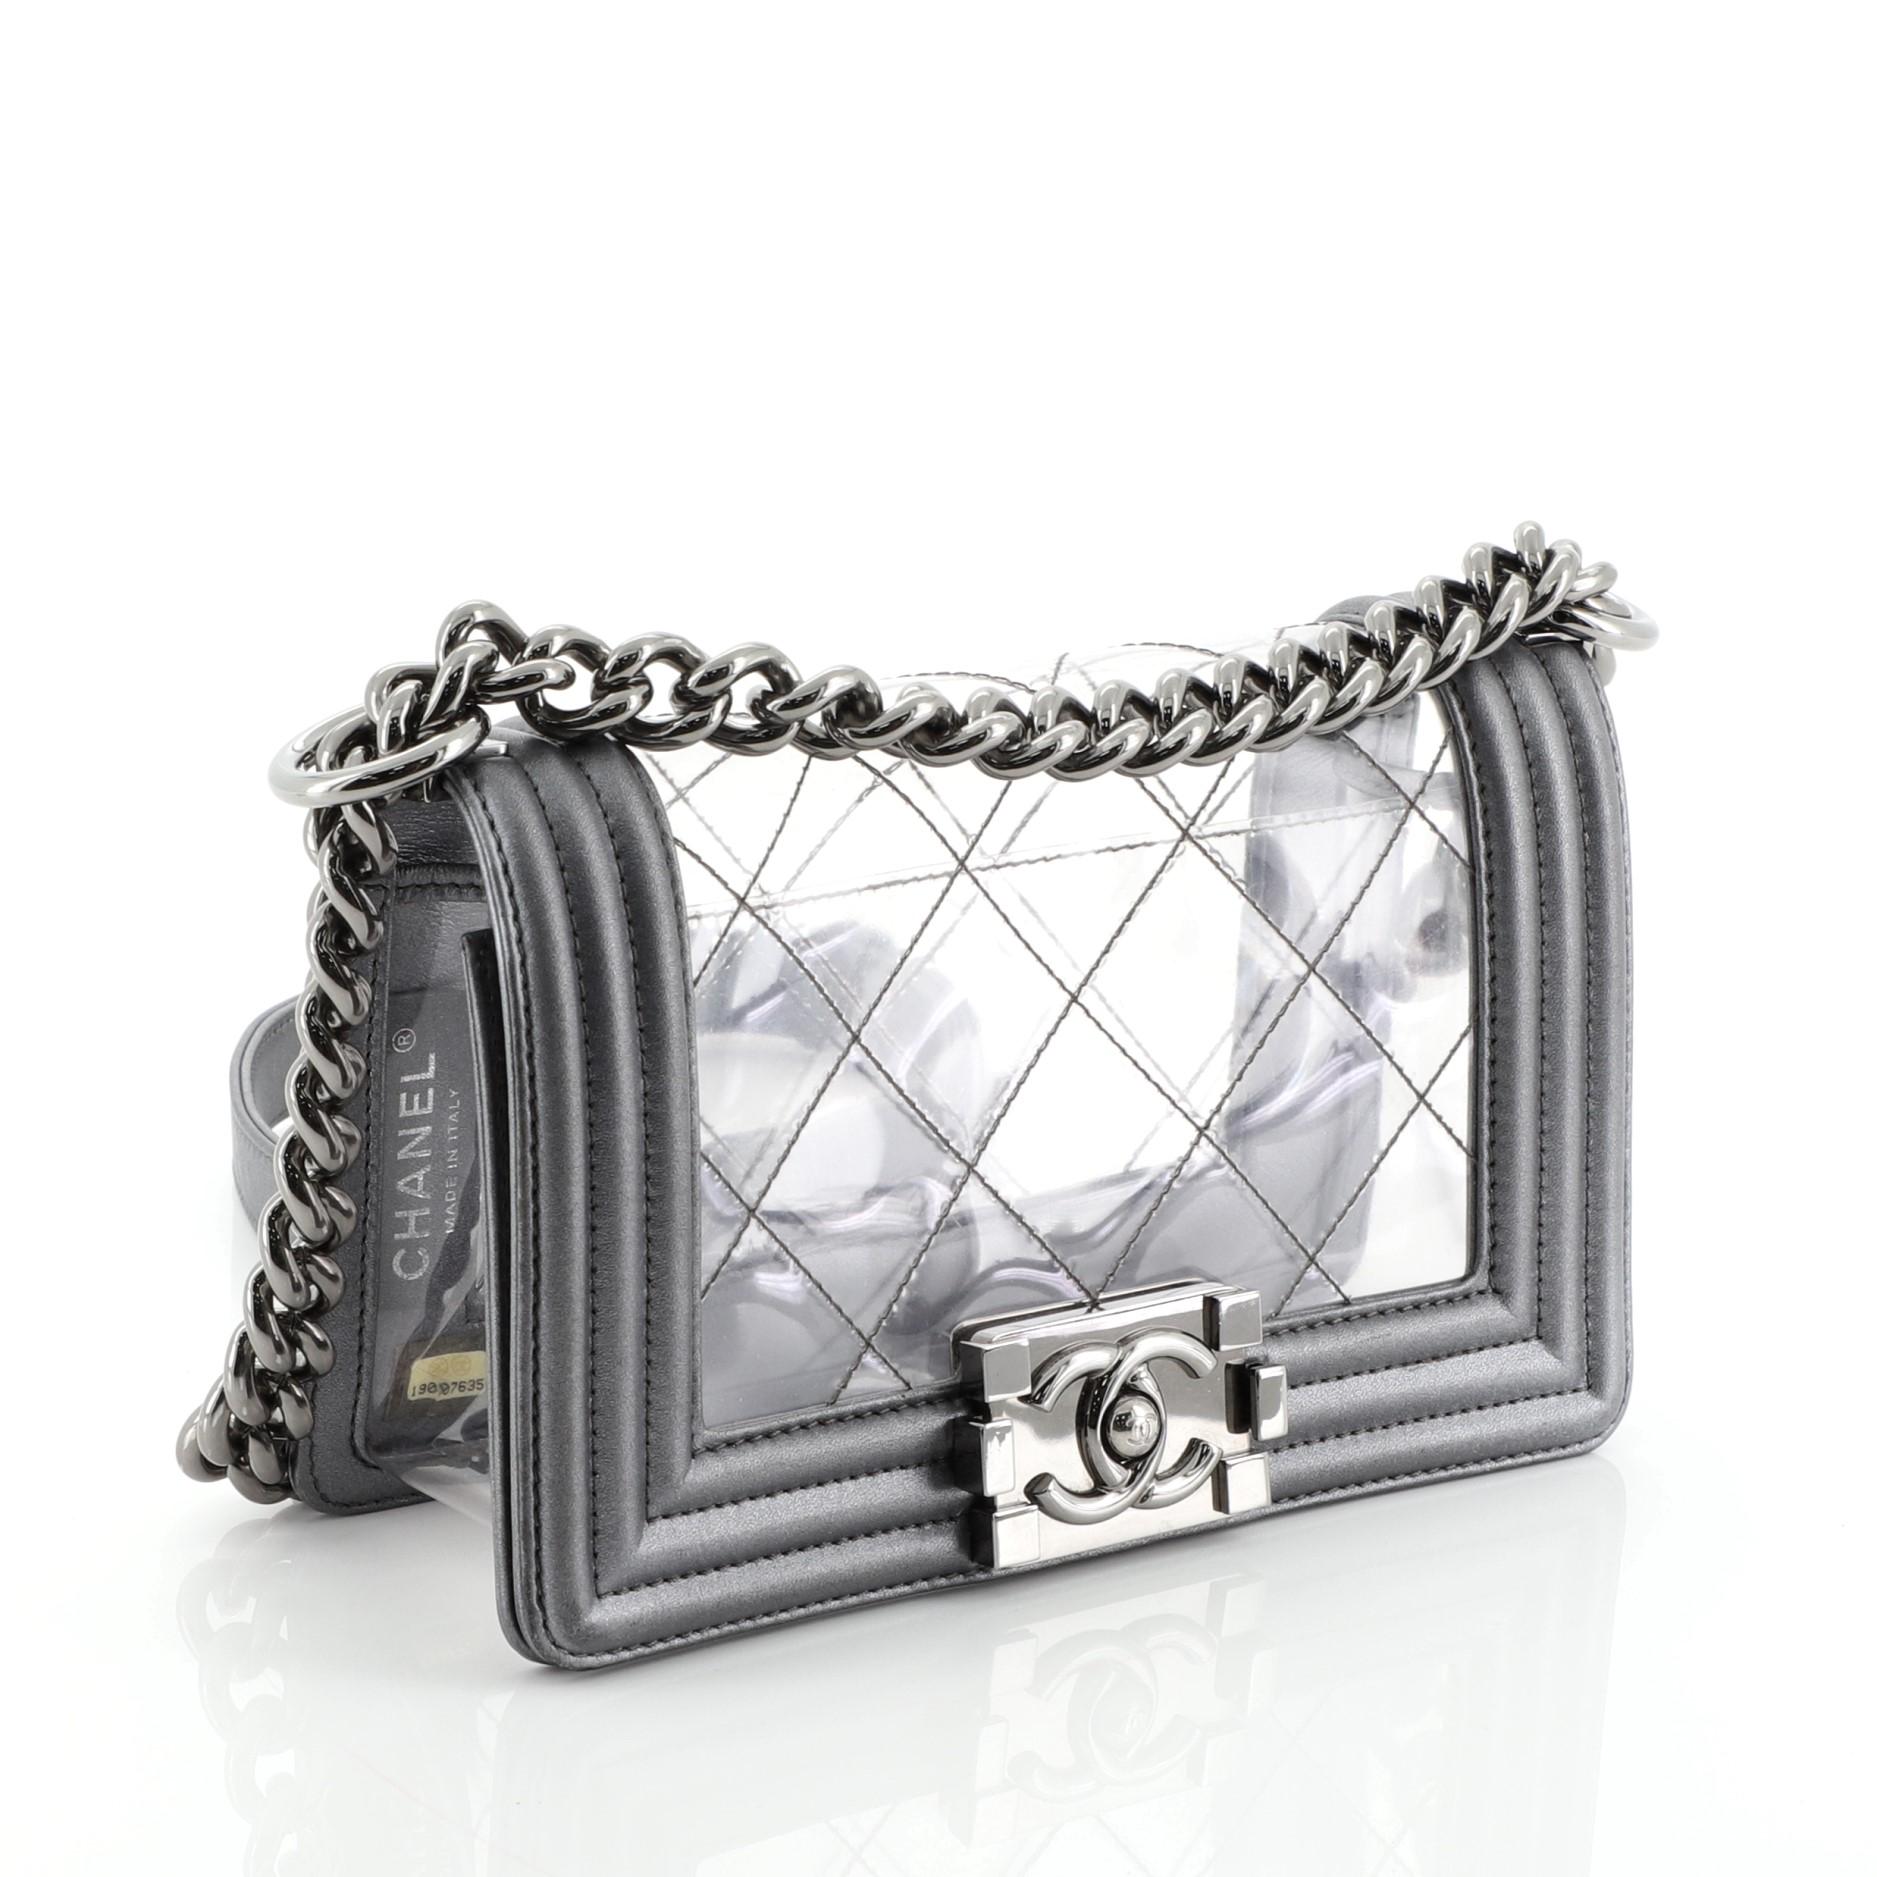 This Chanel Boy Flap Bag Quilted PVC and Calfskin Small, crafted in quilted clear PVC and gray leather, features chain link strap with shoulder pad and gunmetal-tone hardware. Its CC Boy logo push-lock closure opens to a clear PVC interior. Hologram